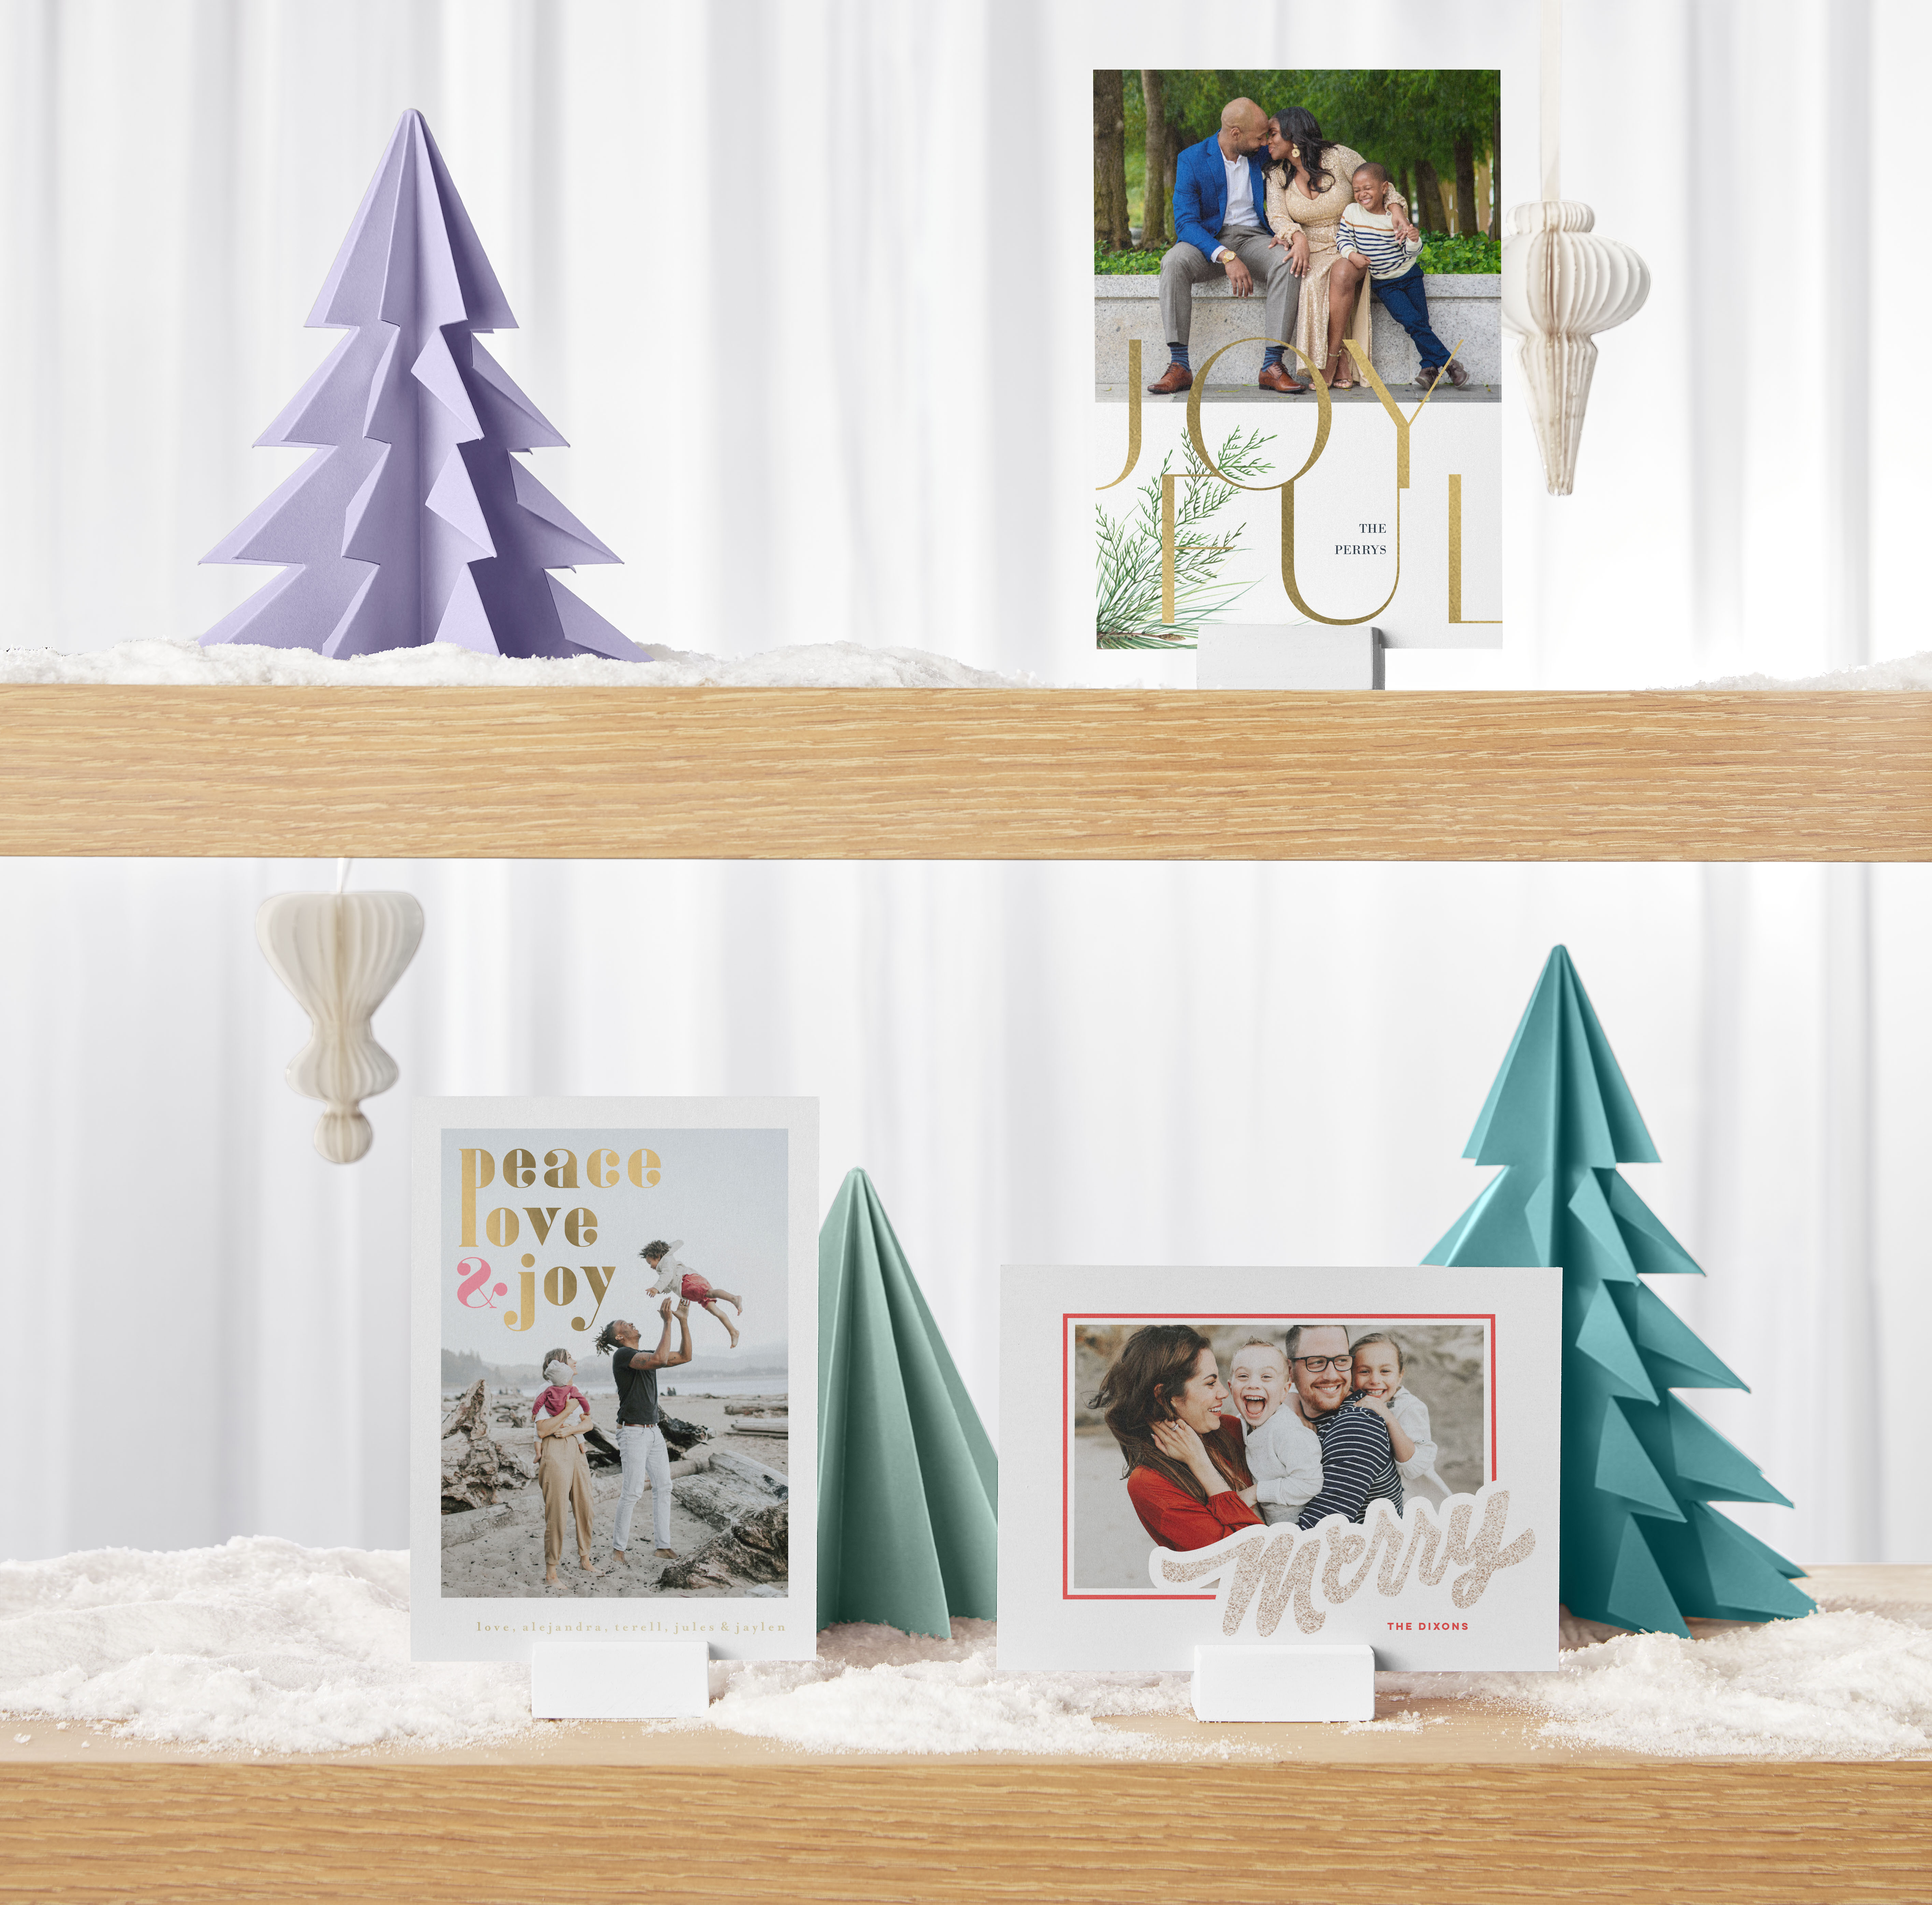 Christmas card display featuring purple and green paper Christmas trees